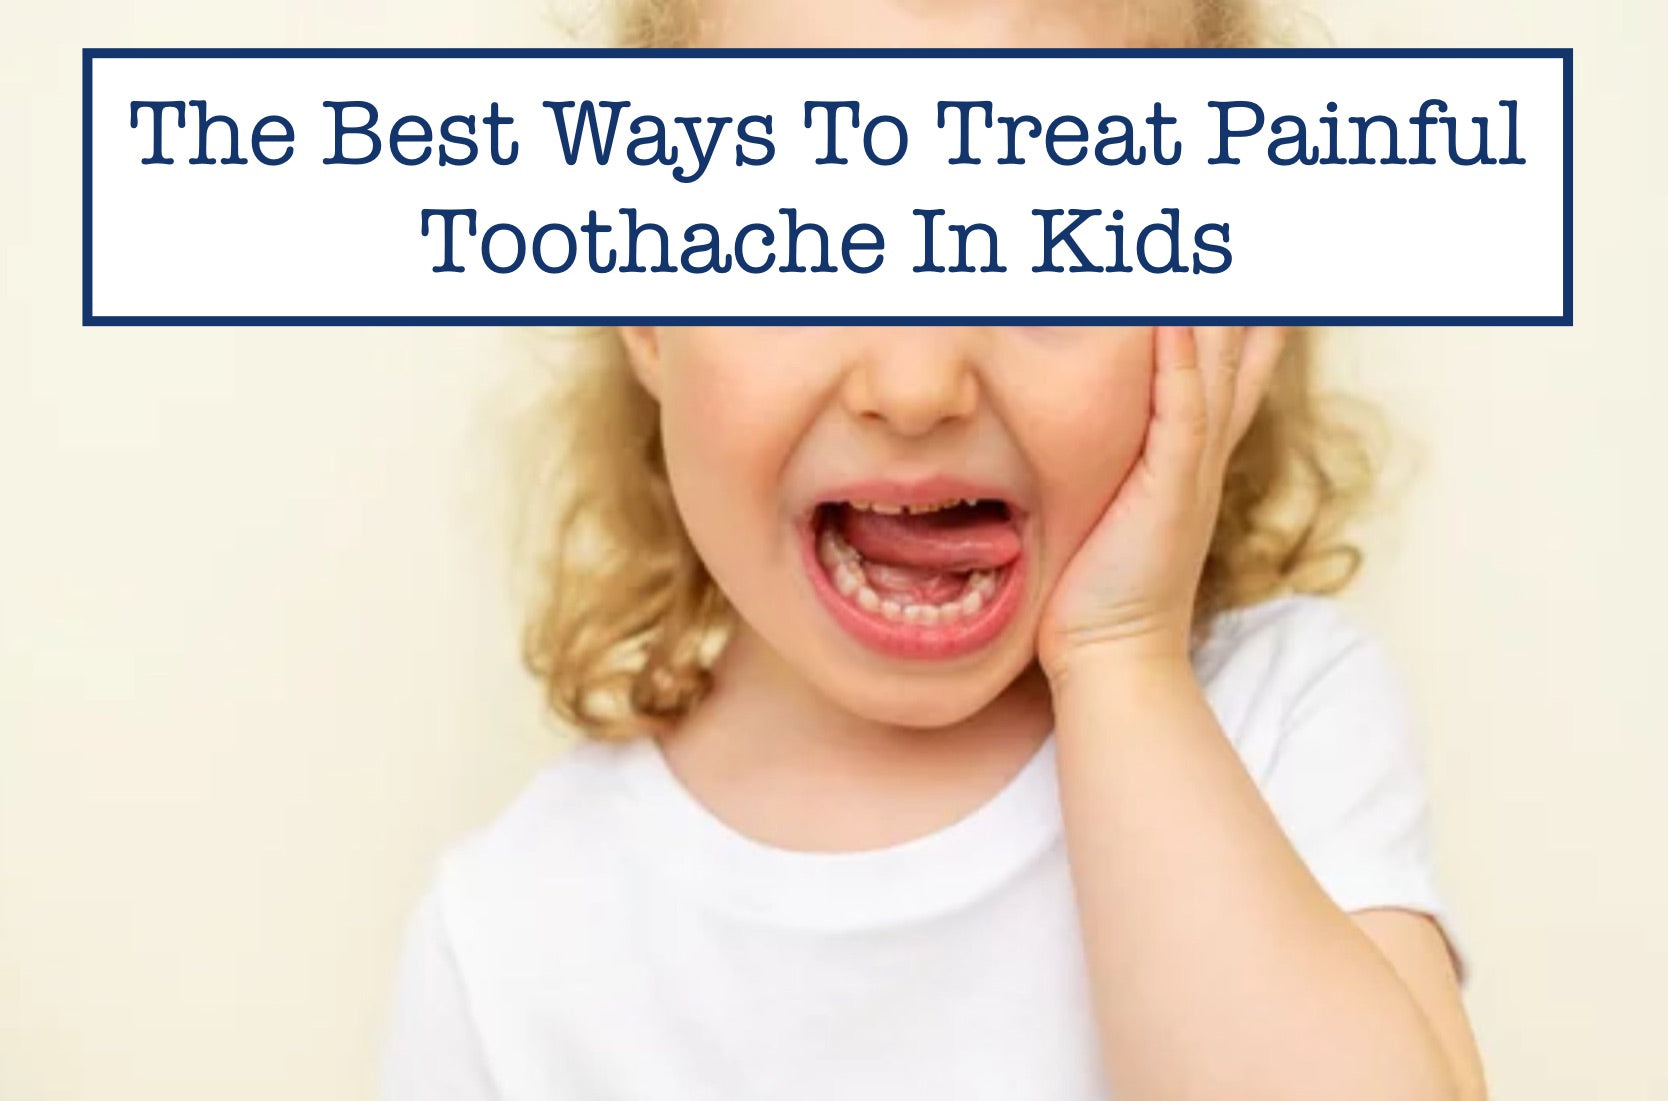 The Best Ways To Treat Painful Toothache In Kids